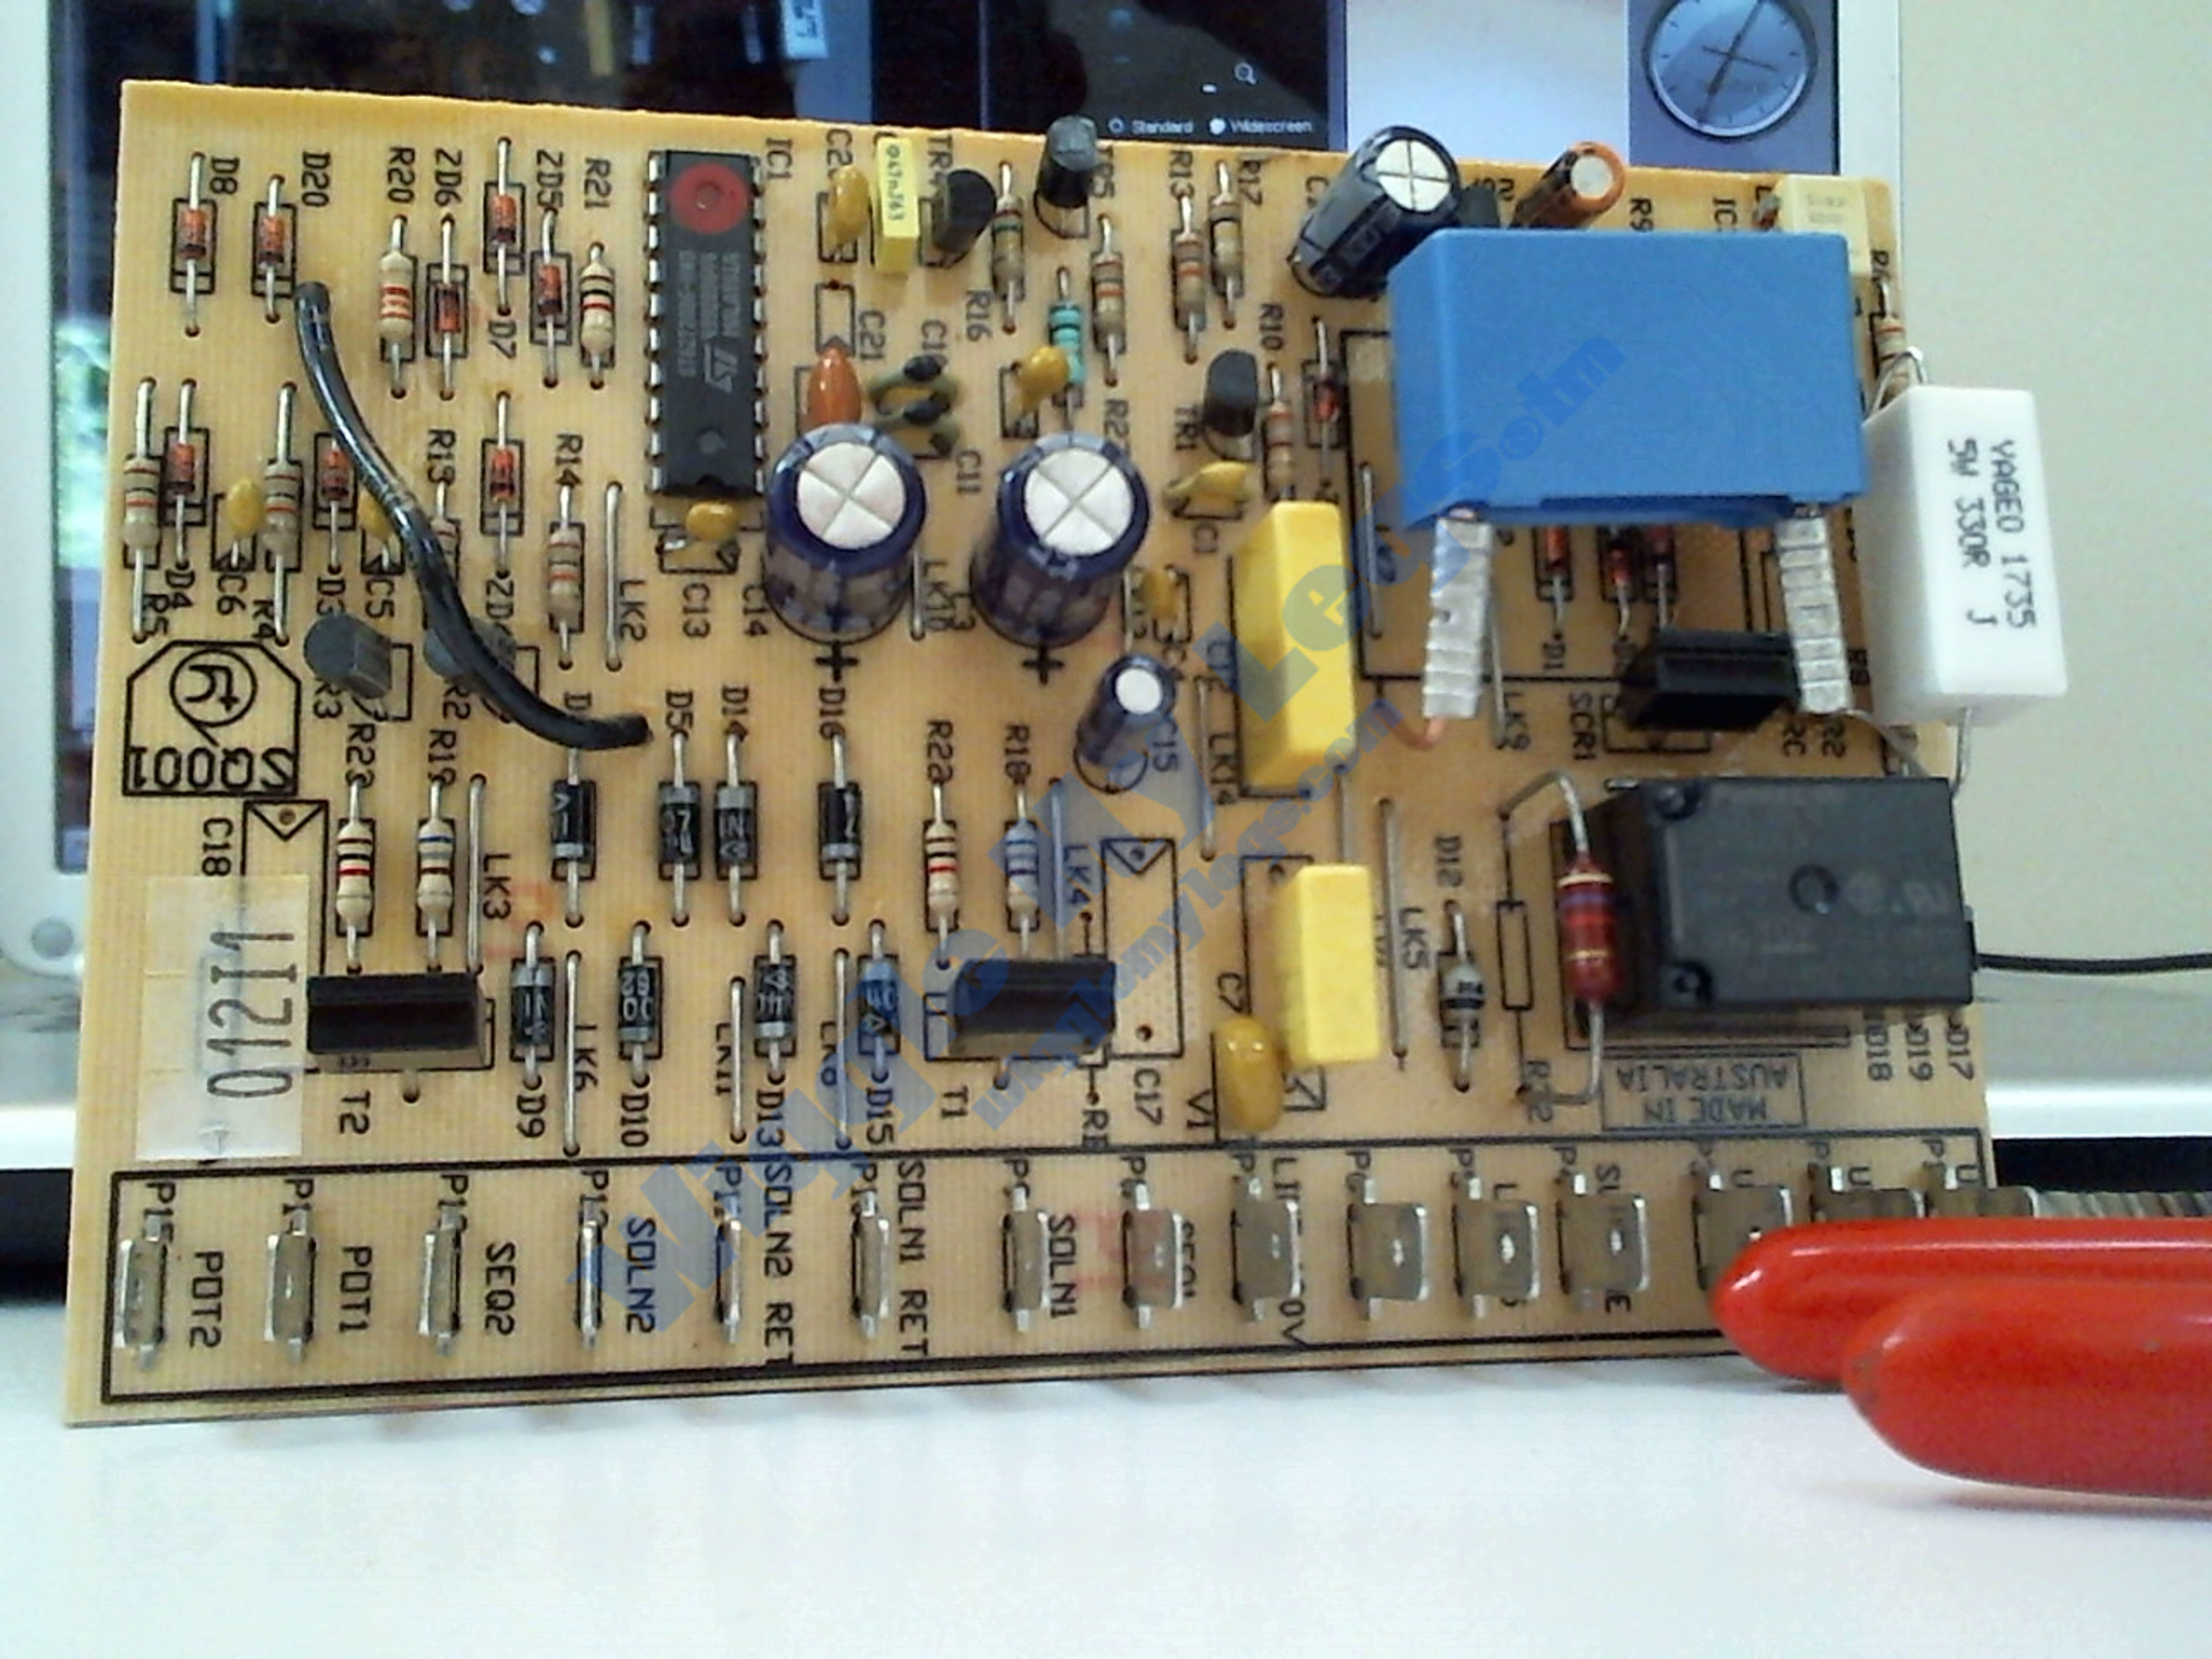 Photo of the component side of the repaired PCB.